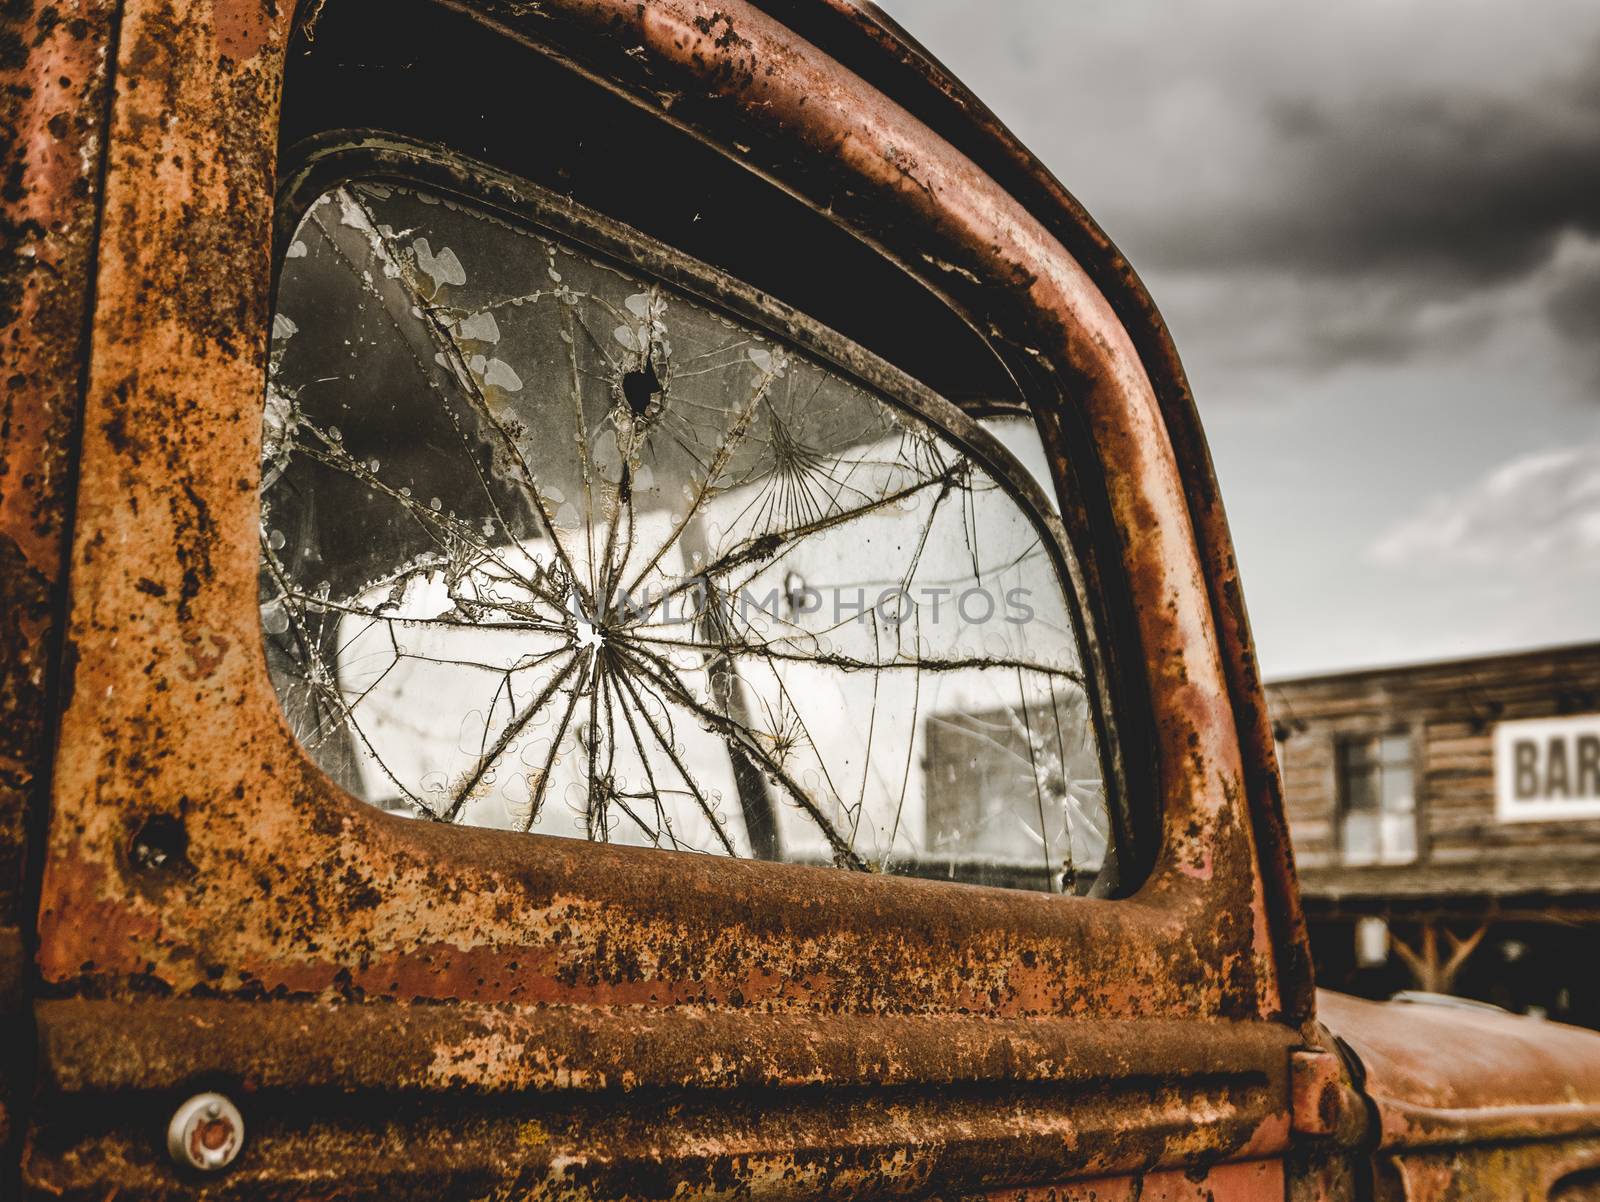 Retro Filtered Americana Image Of A Vintage Rusty Truck Outside A Bar